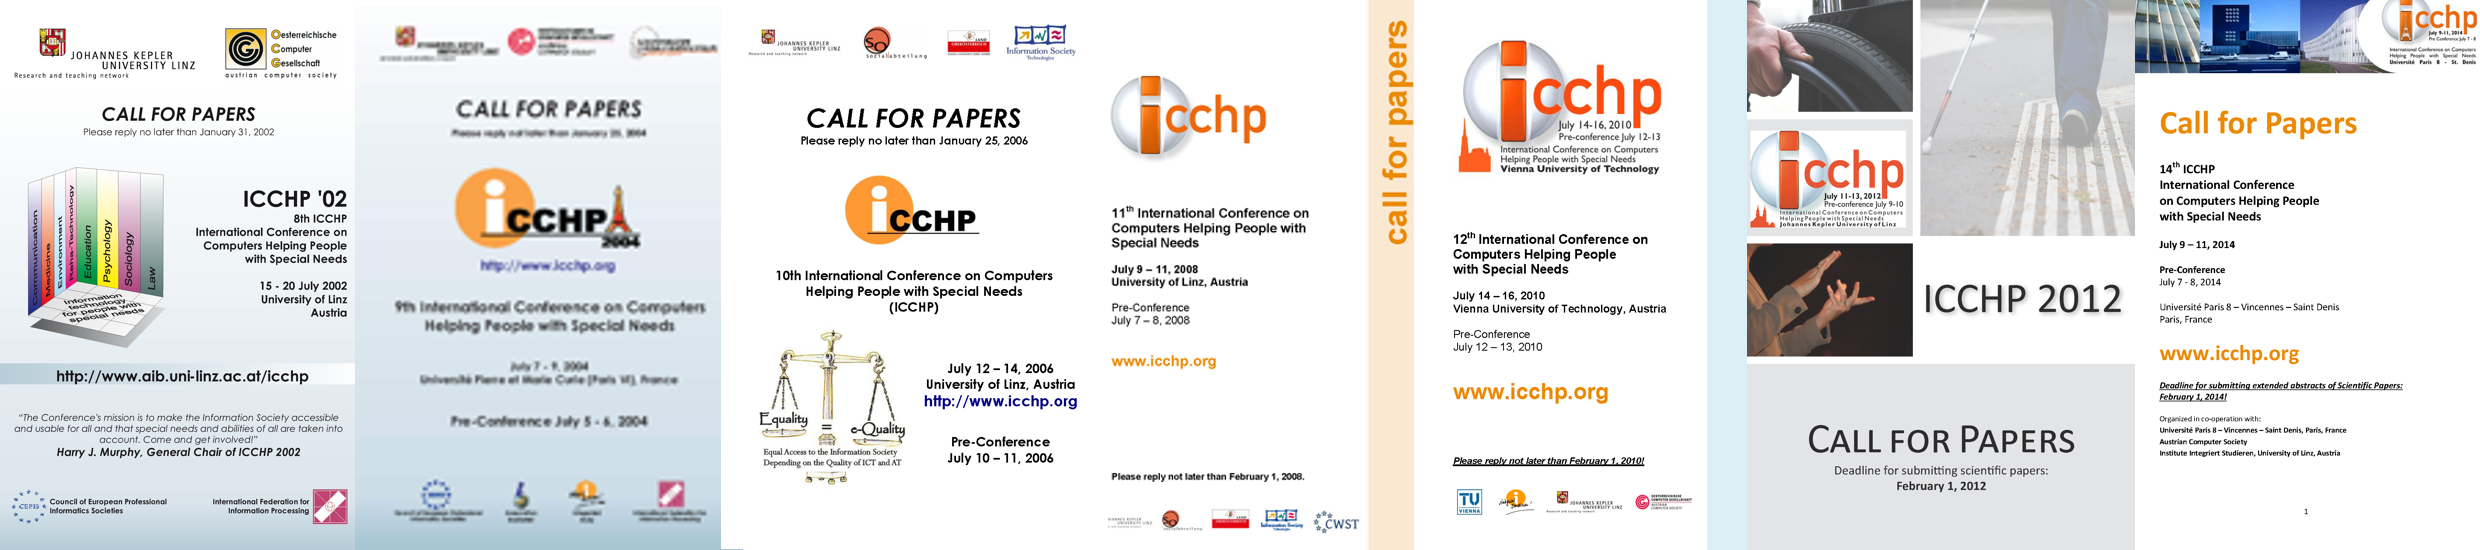 All ICCHP Call Covers from 2002 - 2014